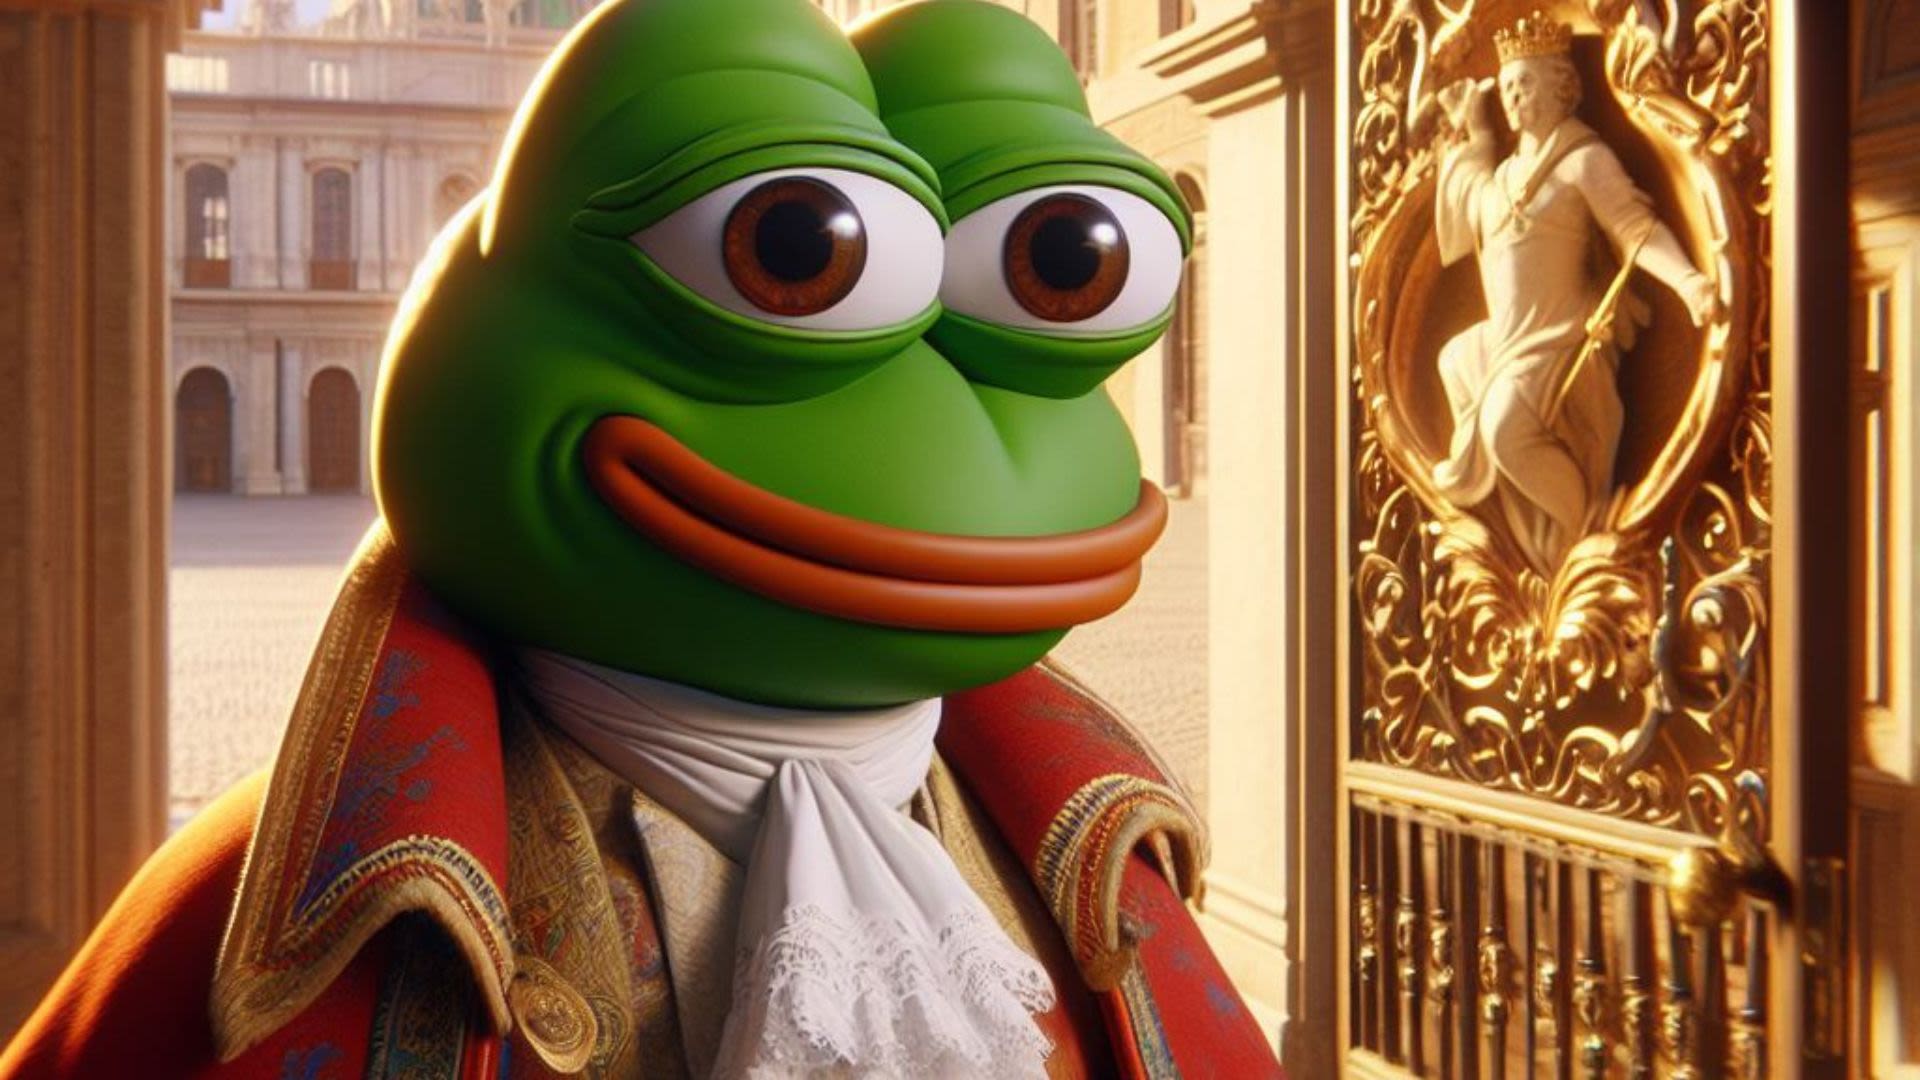 Pepe Price Prediction: PEPE Plunges 7% As This New Pepe Upgrade Zooms Towards $4 Million In Presale